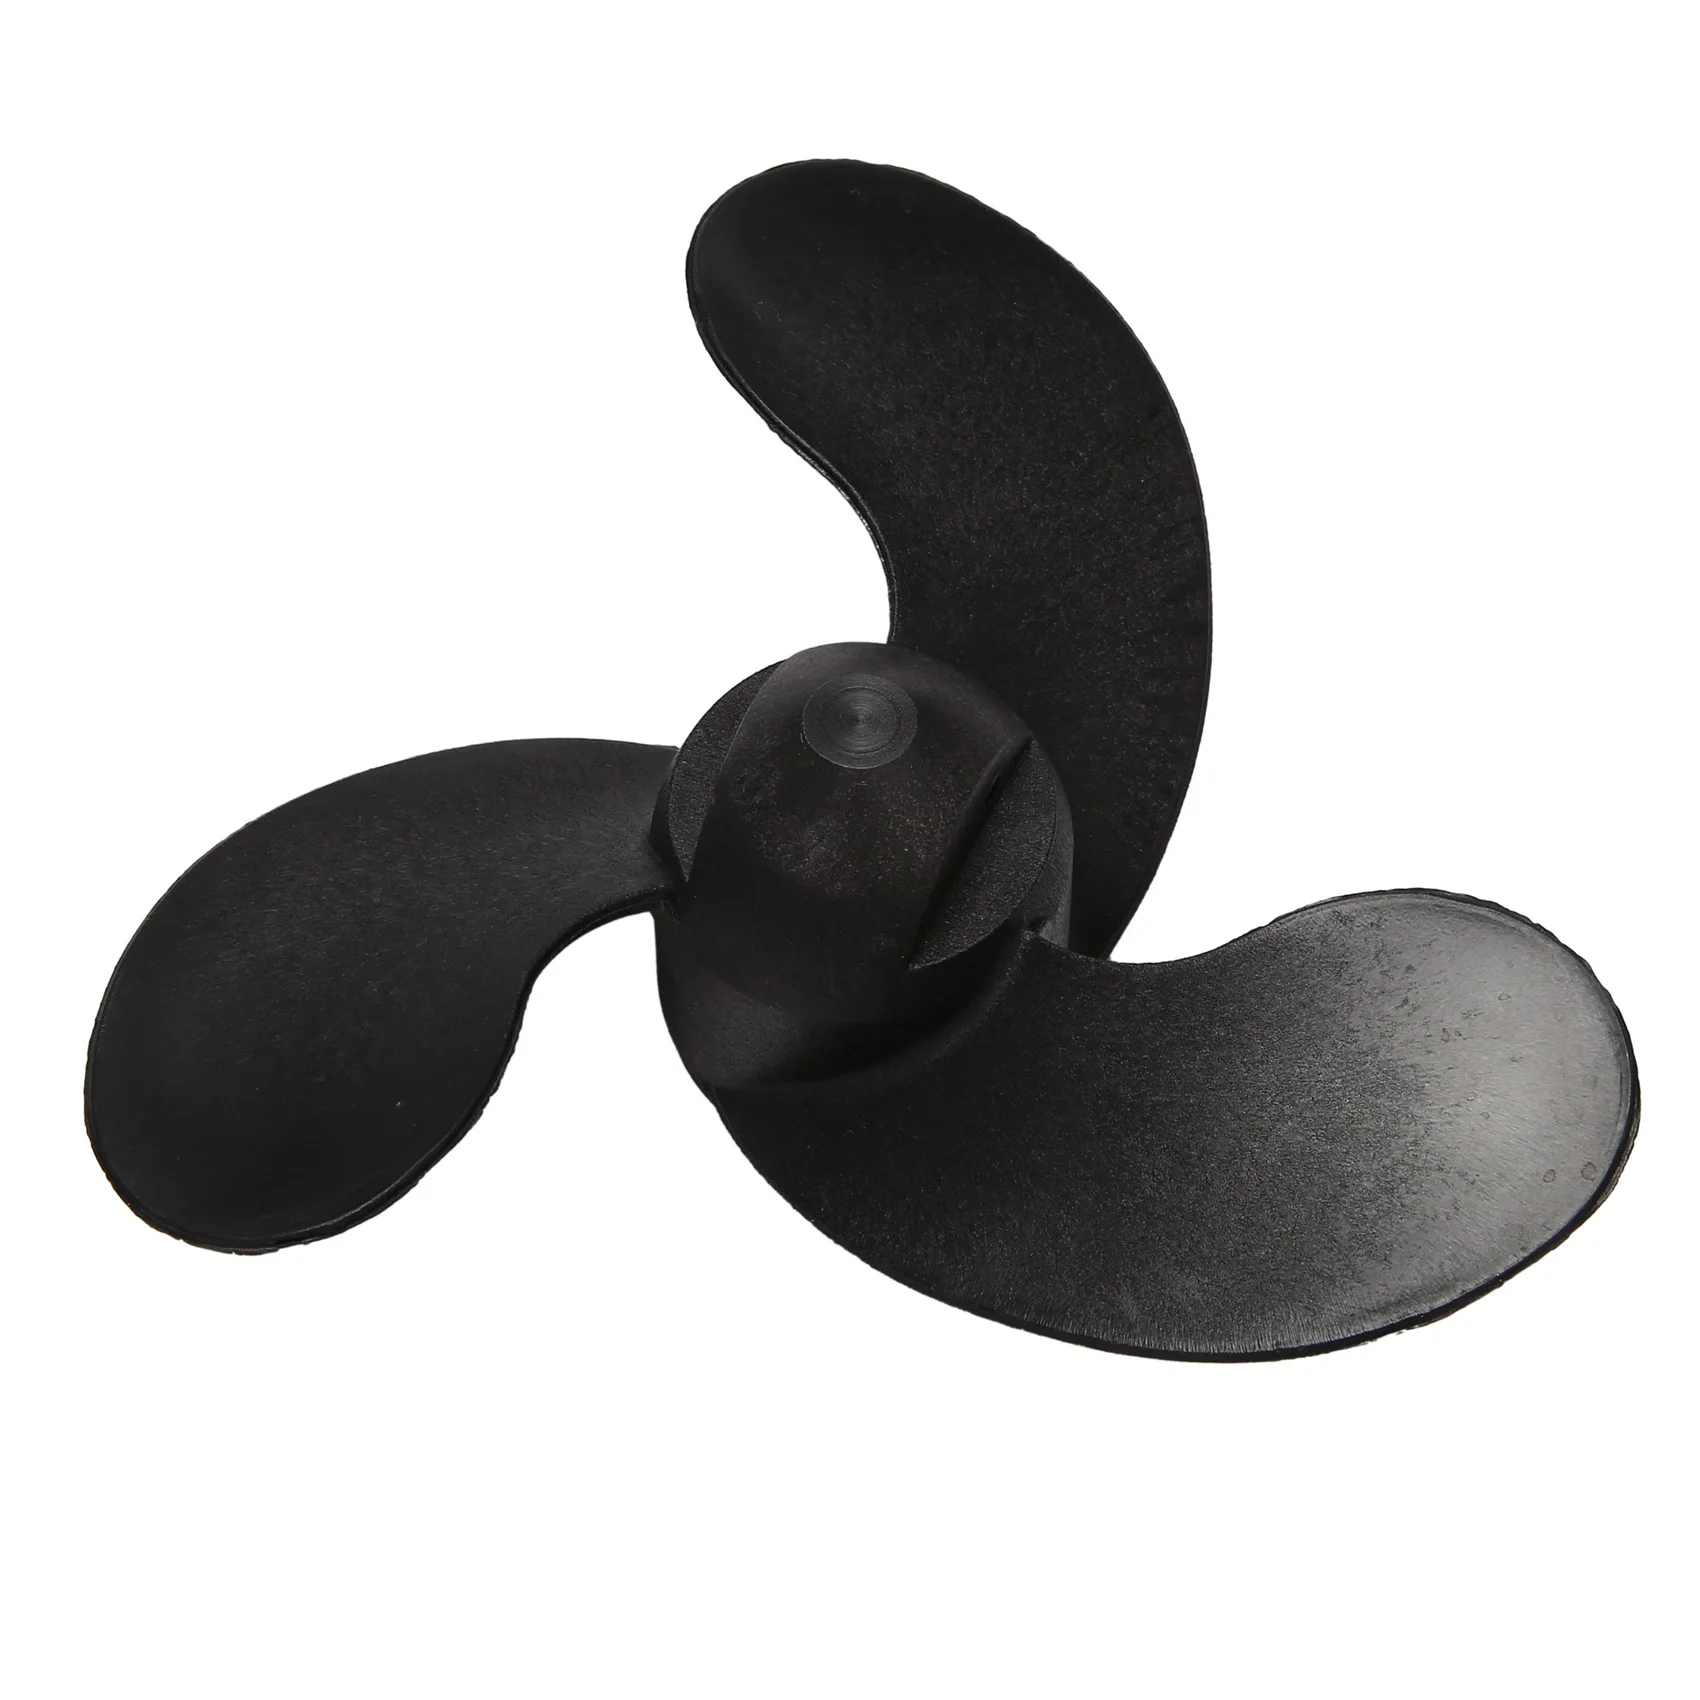 

3 Black Leaves Marine Outboard Propeller for Mercury/Nissan/Tohatsu 3.5/2.5HP 47.05mm(Diameter) x 78.05mm(Pitch)